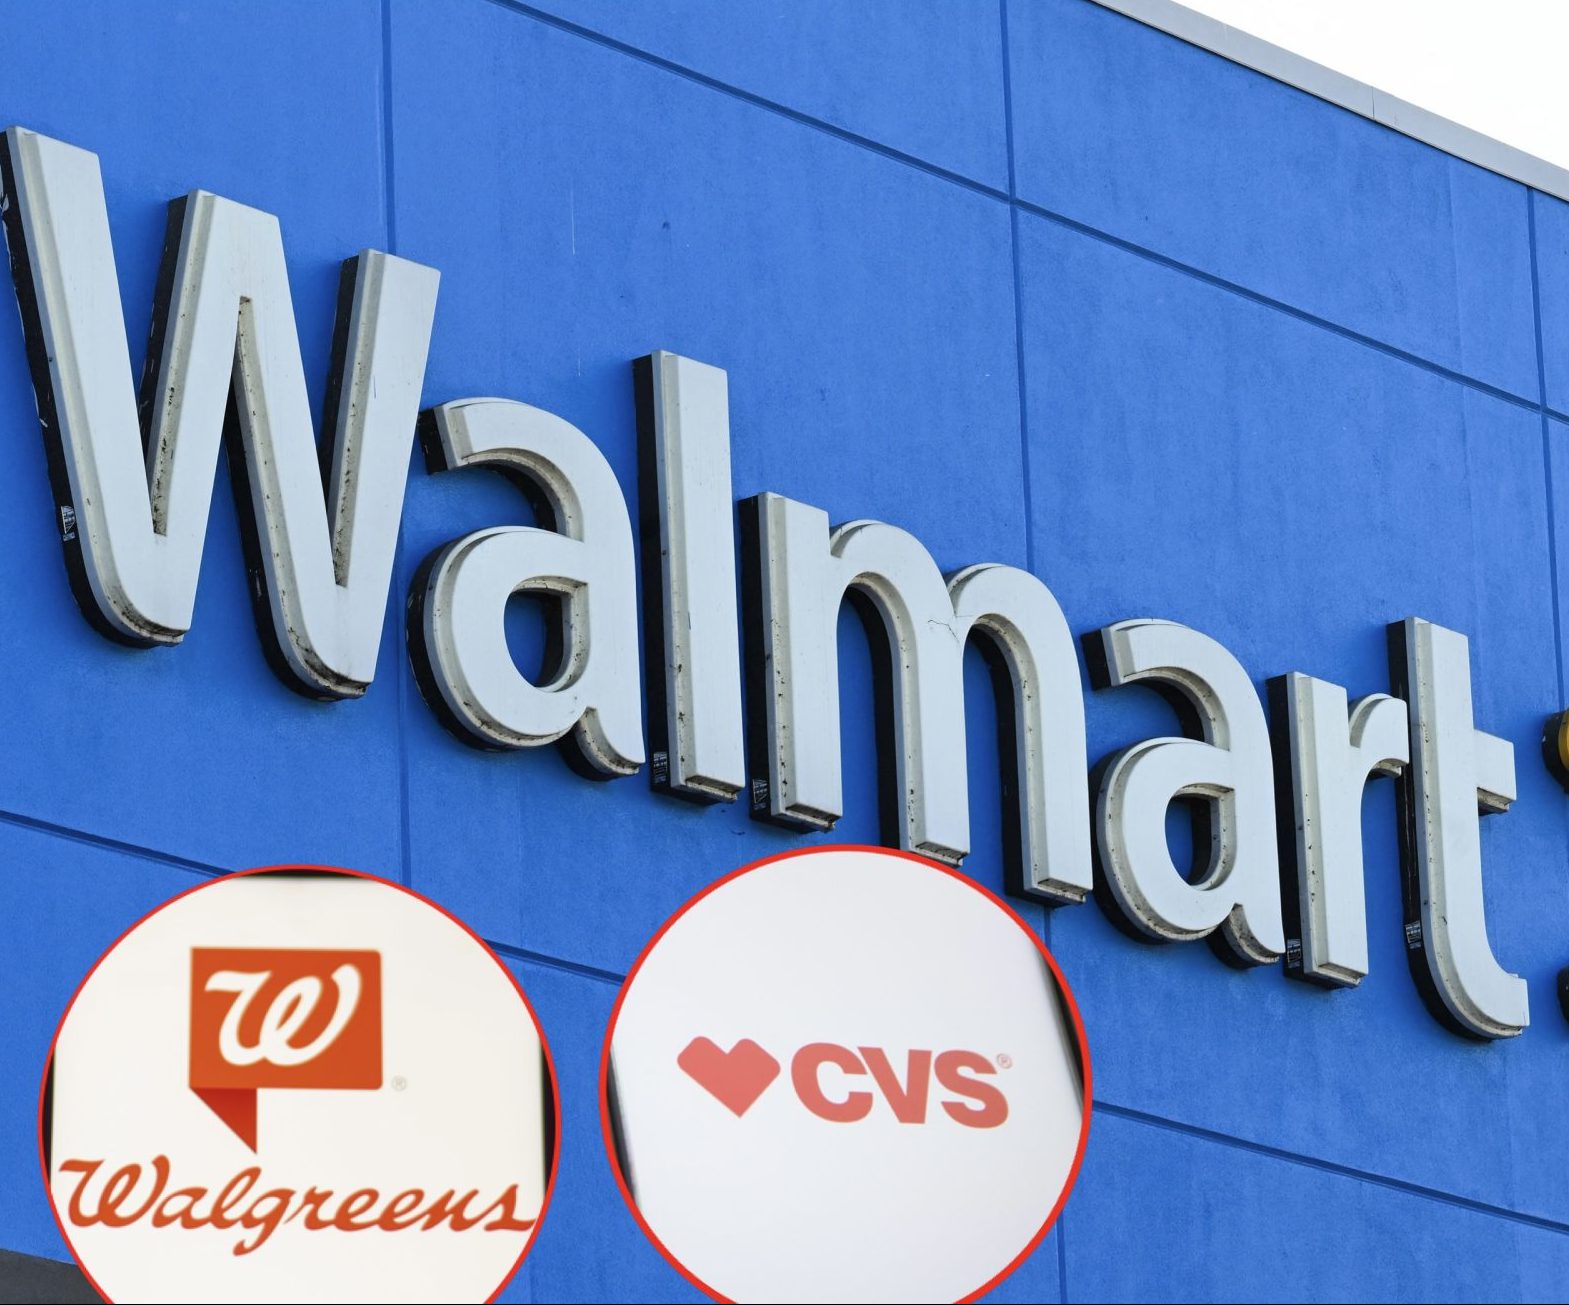 Federal Judge Rules Walmart, CVS, And Walgreens Must Pay $650.6 Million For Damages Related To Opioid Epidemic